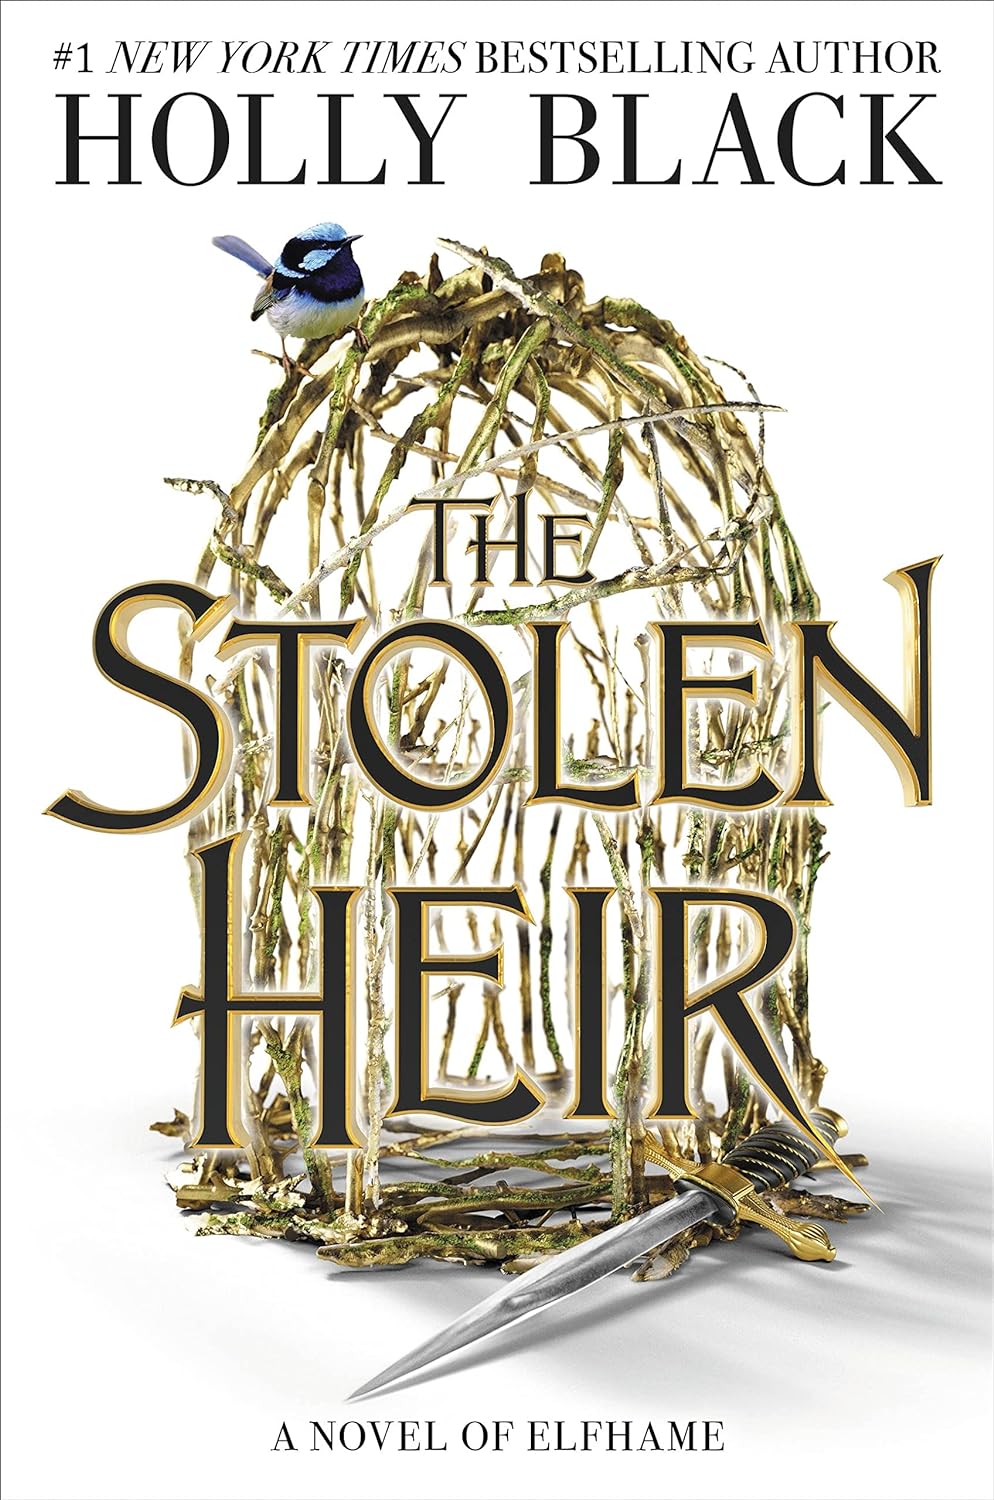 The Stolen Heir - by Holly Black (Hardcover)